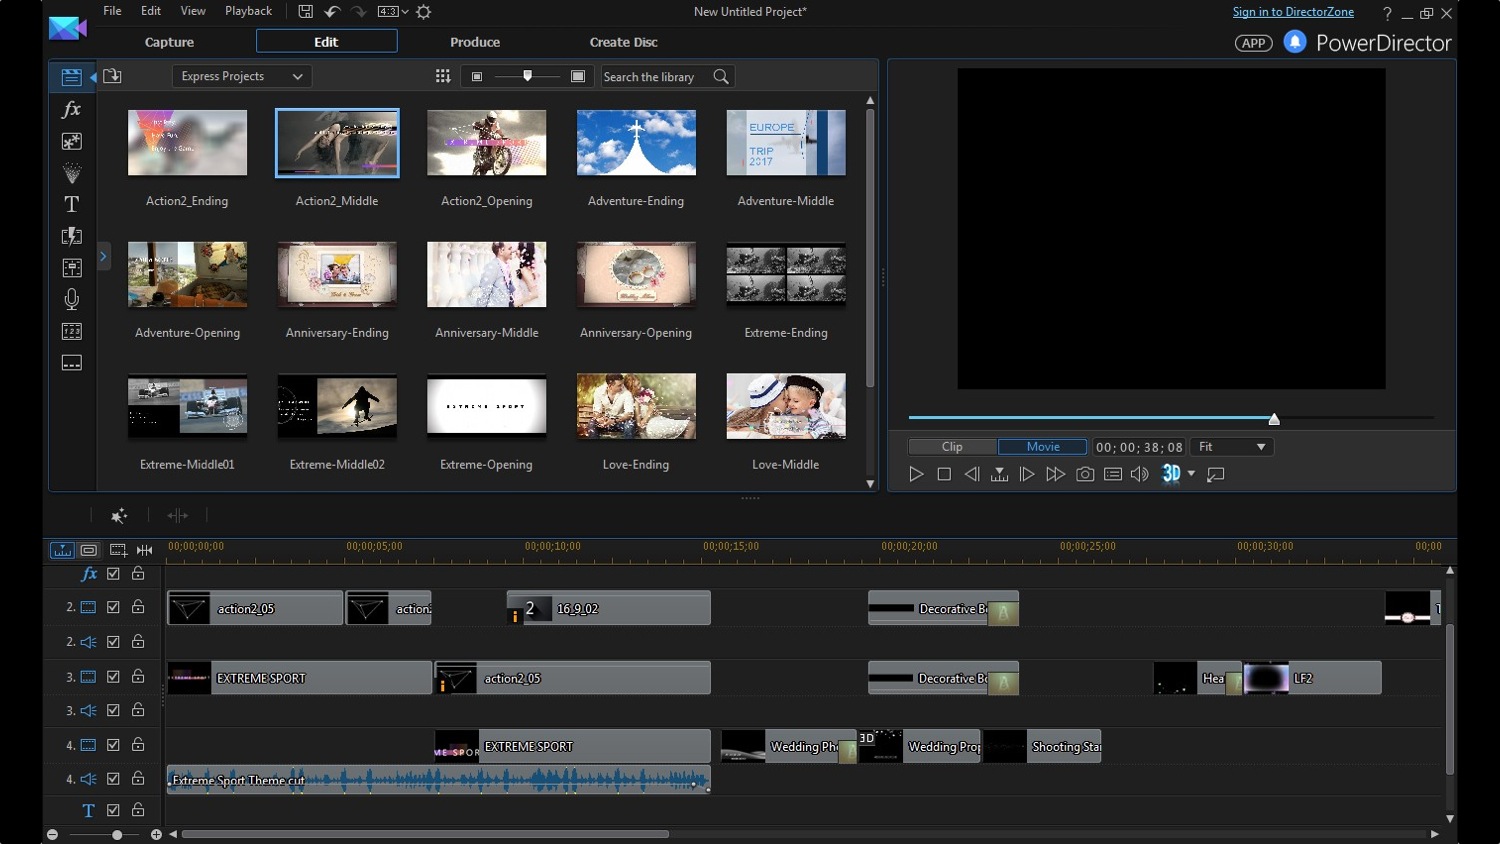 cyberlink director suite 4s new features include action cam video editing express projects enu